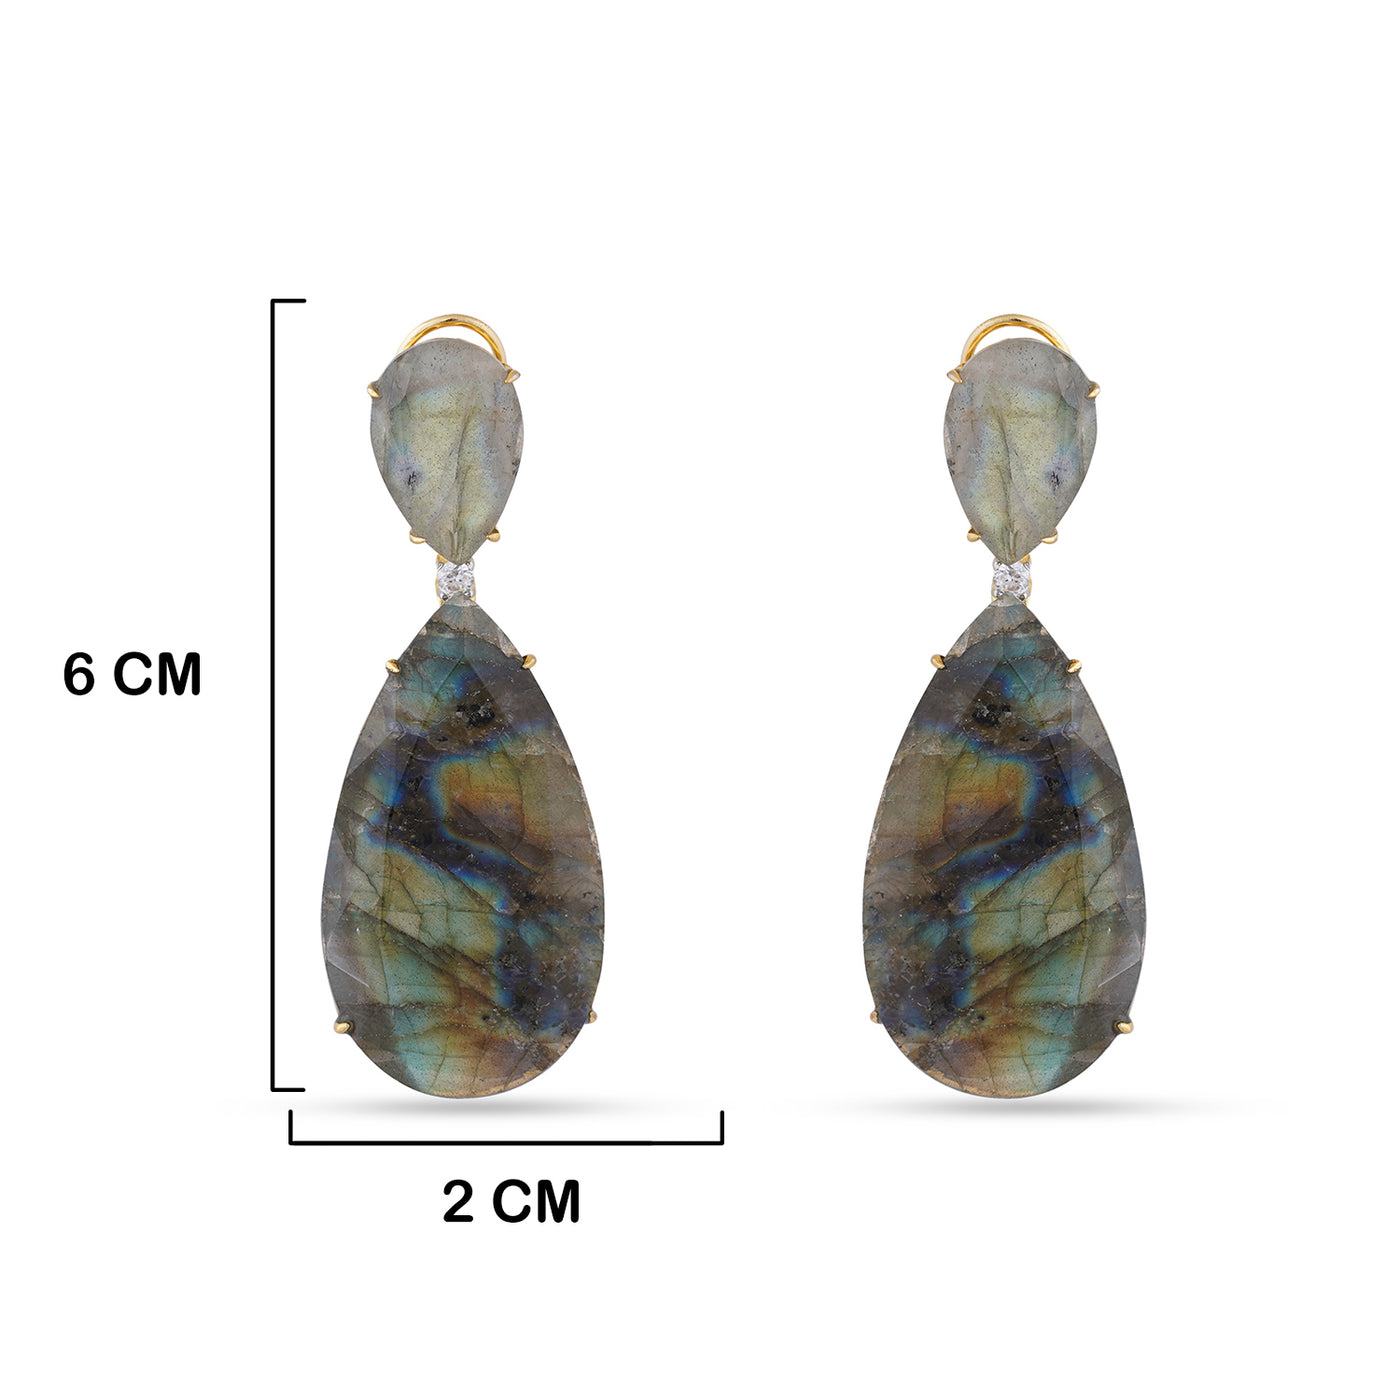 Labradorite Stoned Dangle Earrings with measurements in cm. 6cm by 2cm.